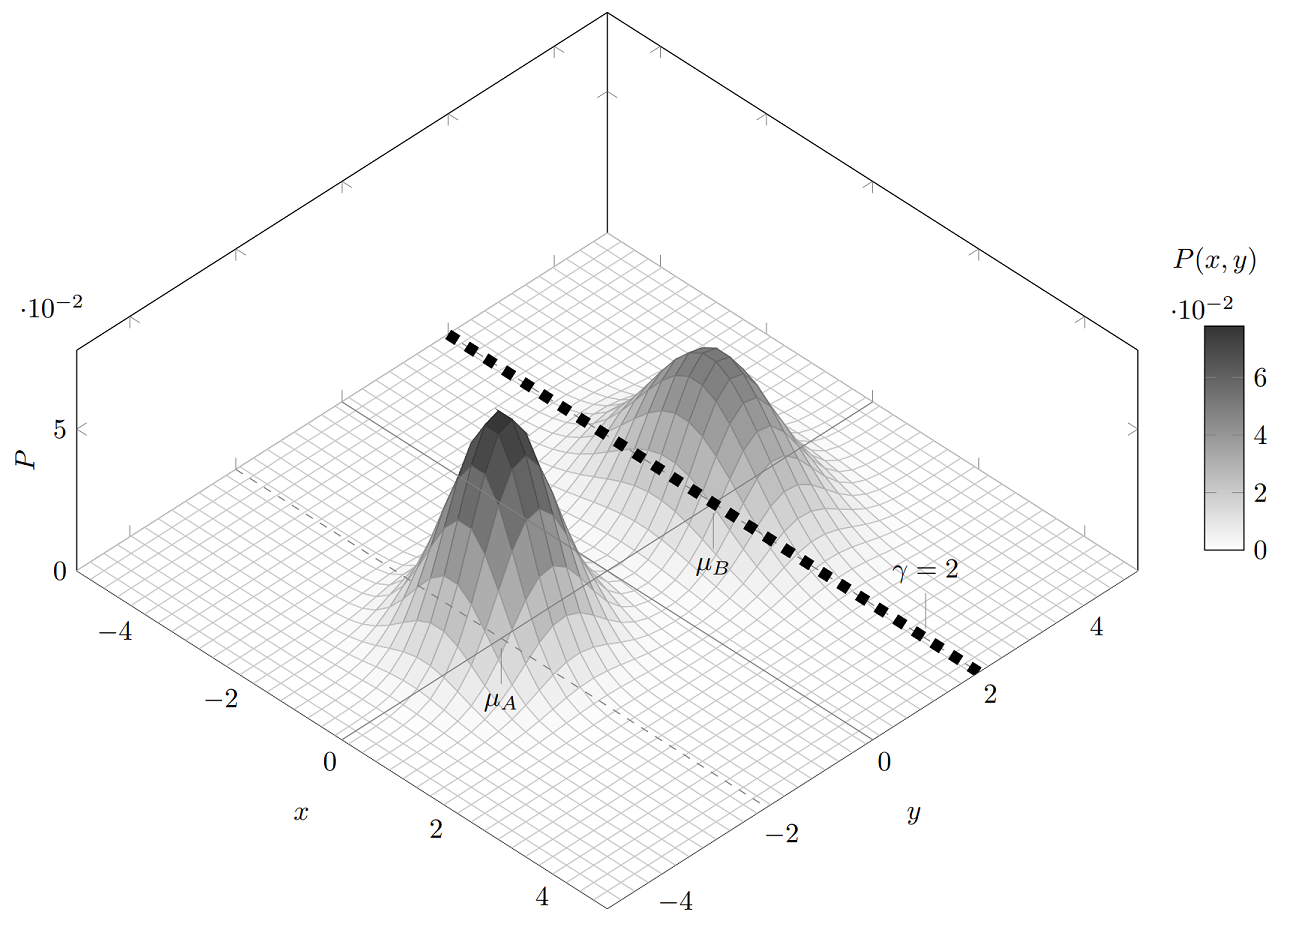 Probability threshold problem using a Gaussian mixture model